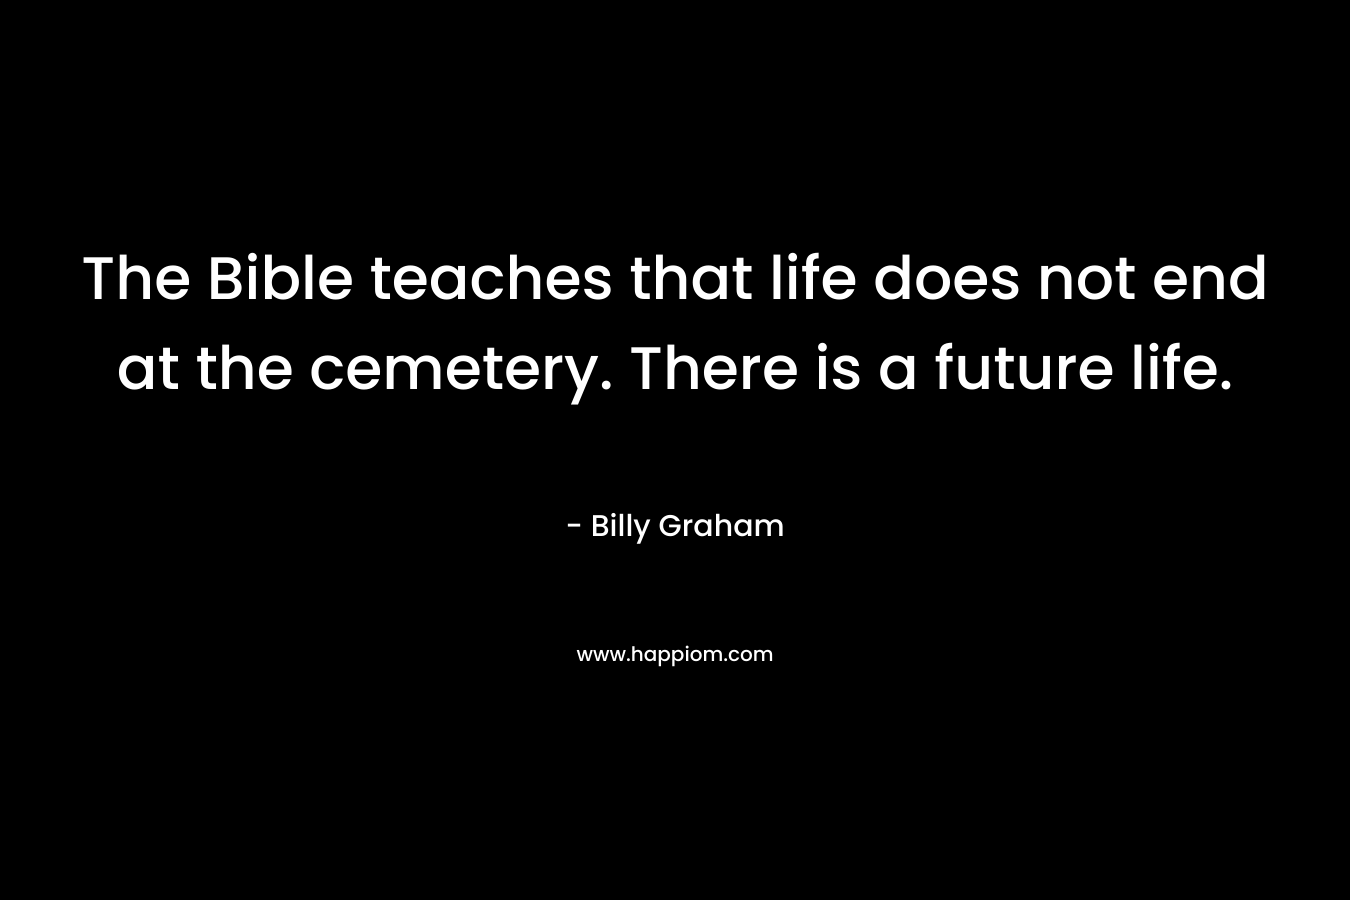 The Bible teaches that life does not end at the cemetery. There is a future life. – Billy Graham